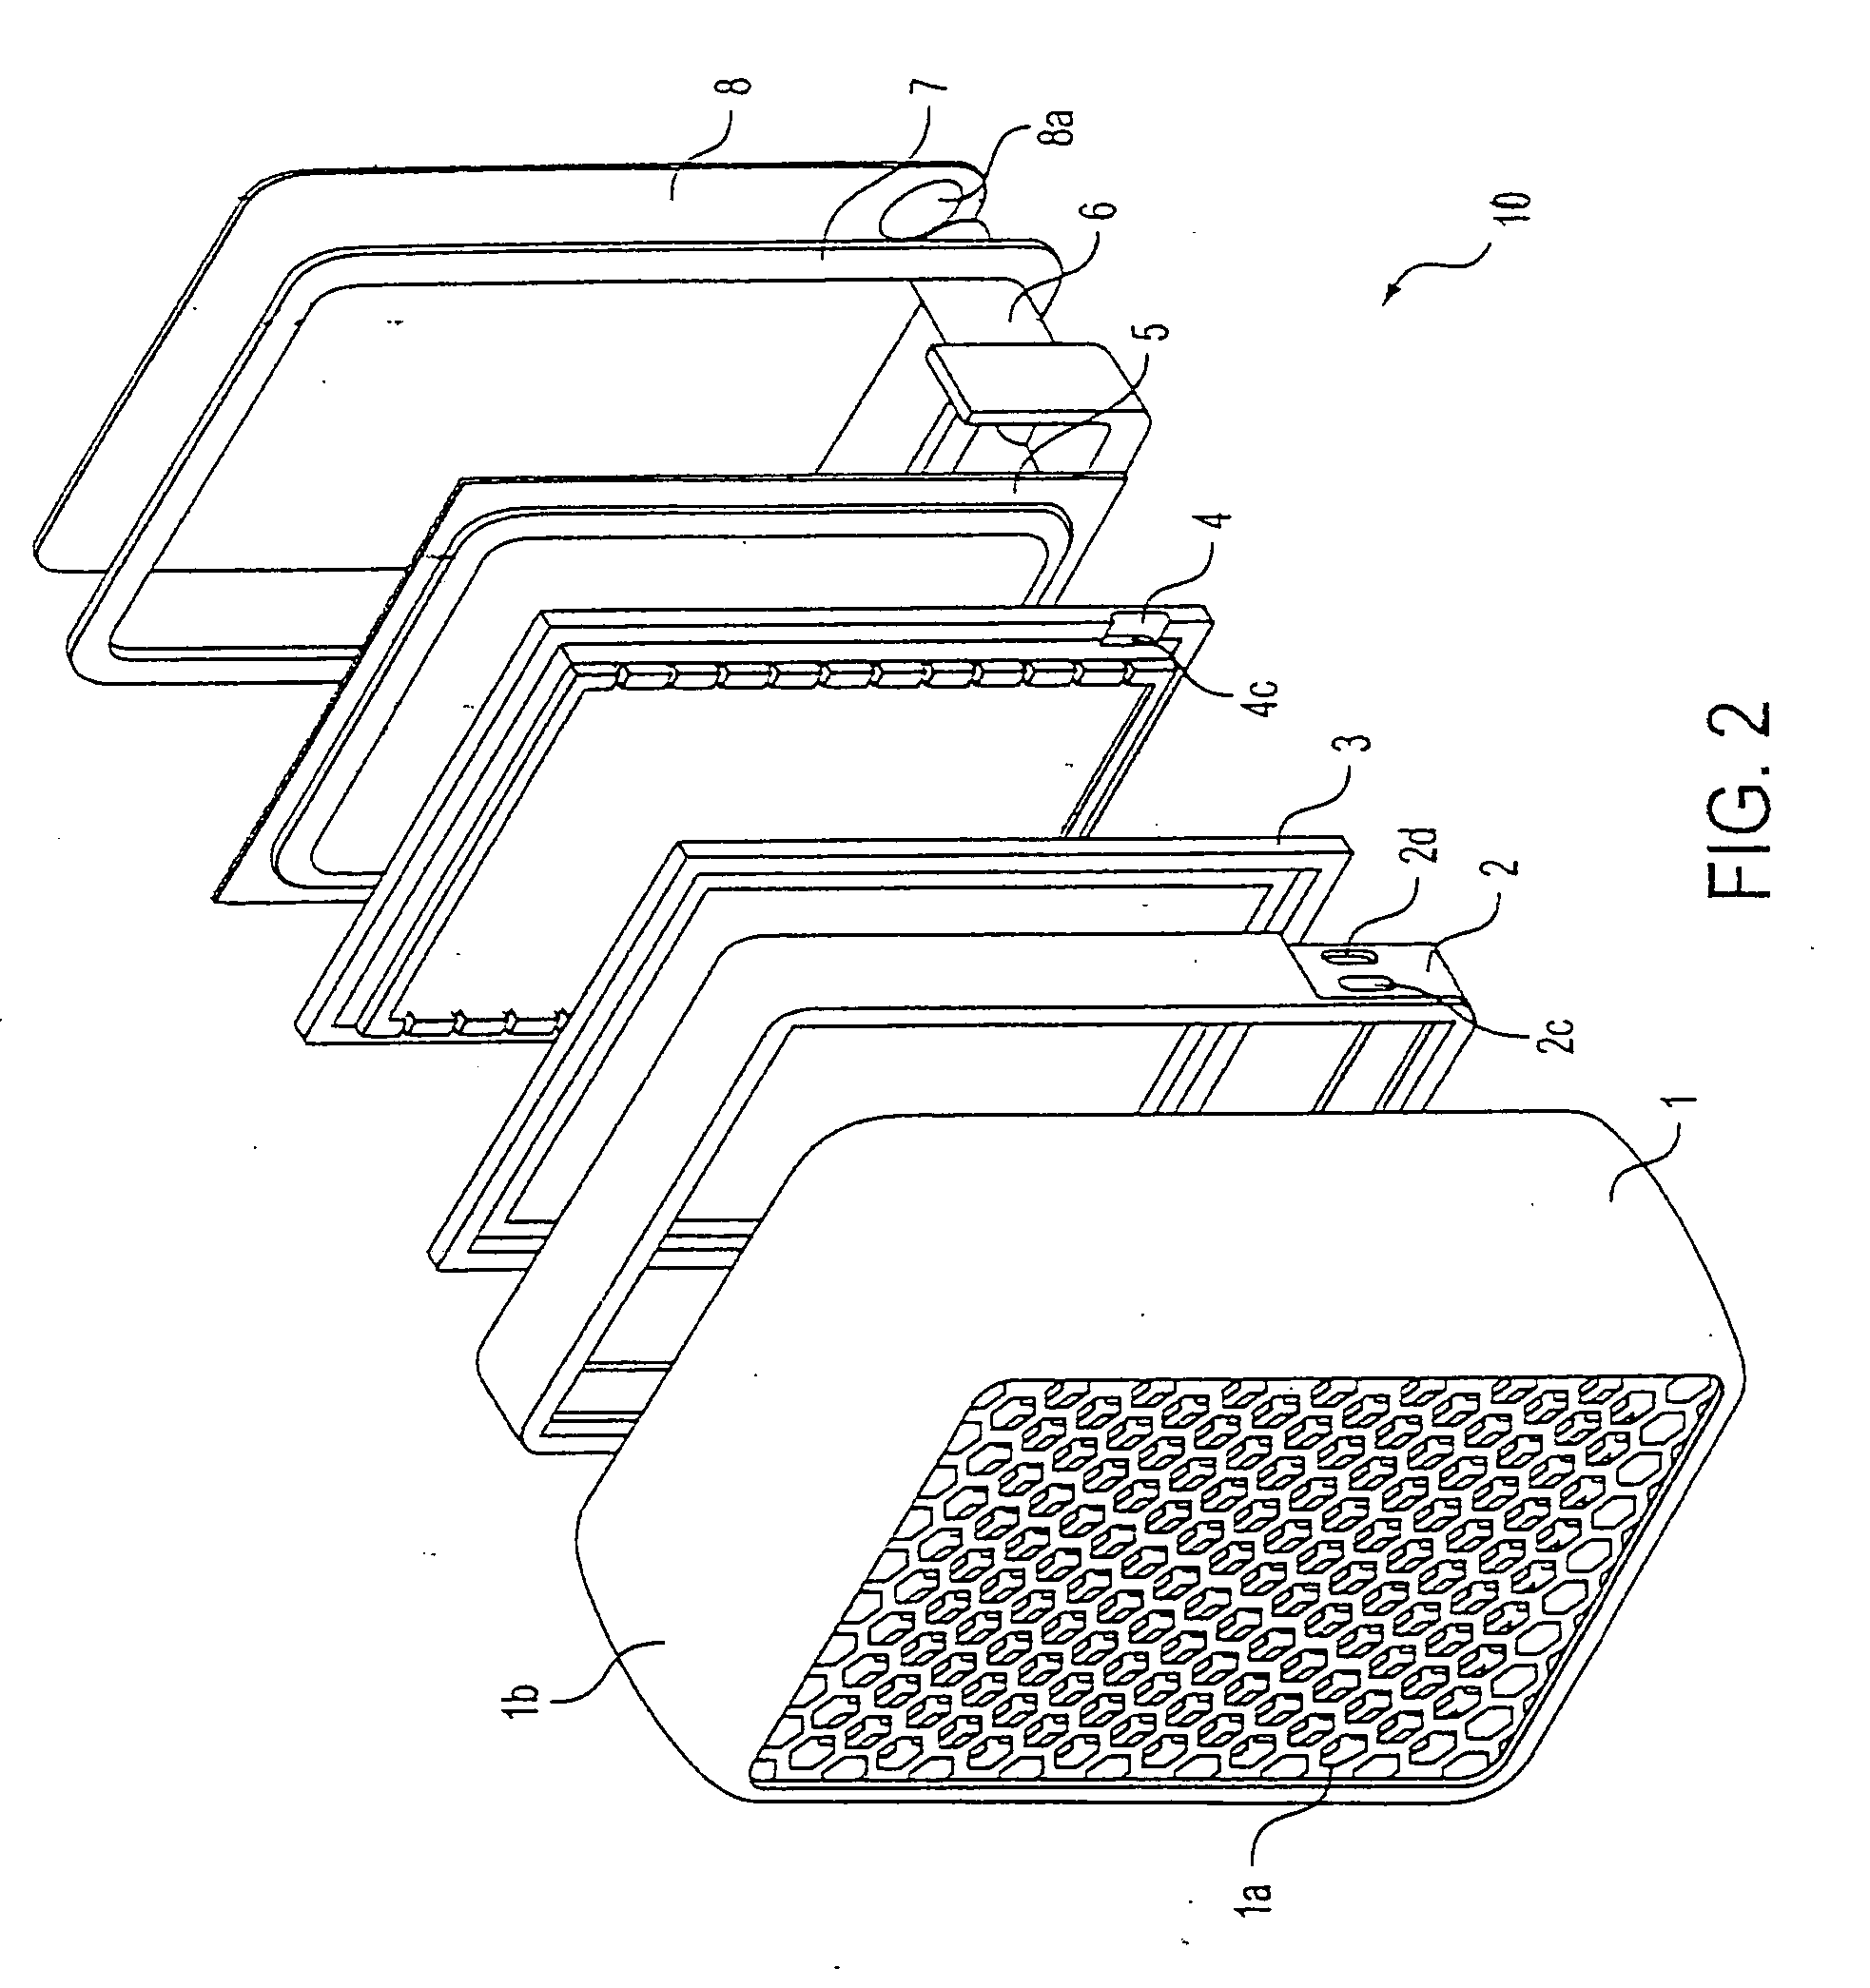 Disposable fuel cell with and without cartridge and method of making and using the fuel cell and cartridge